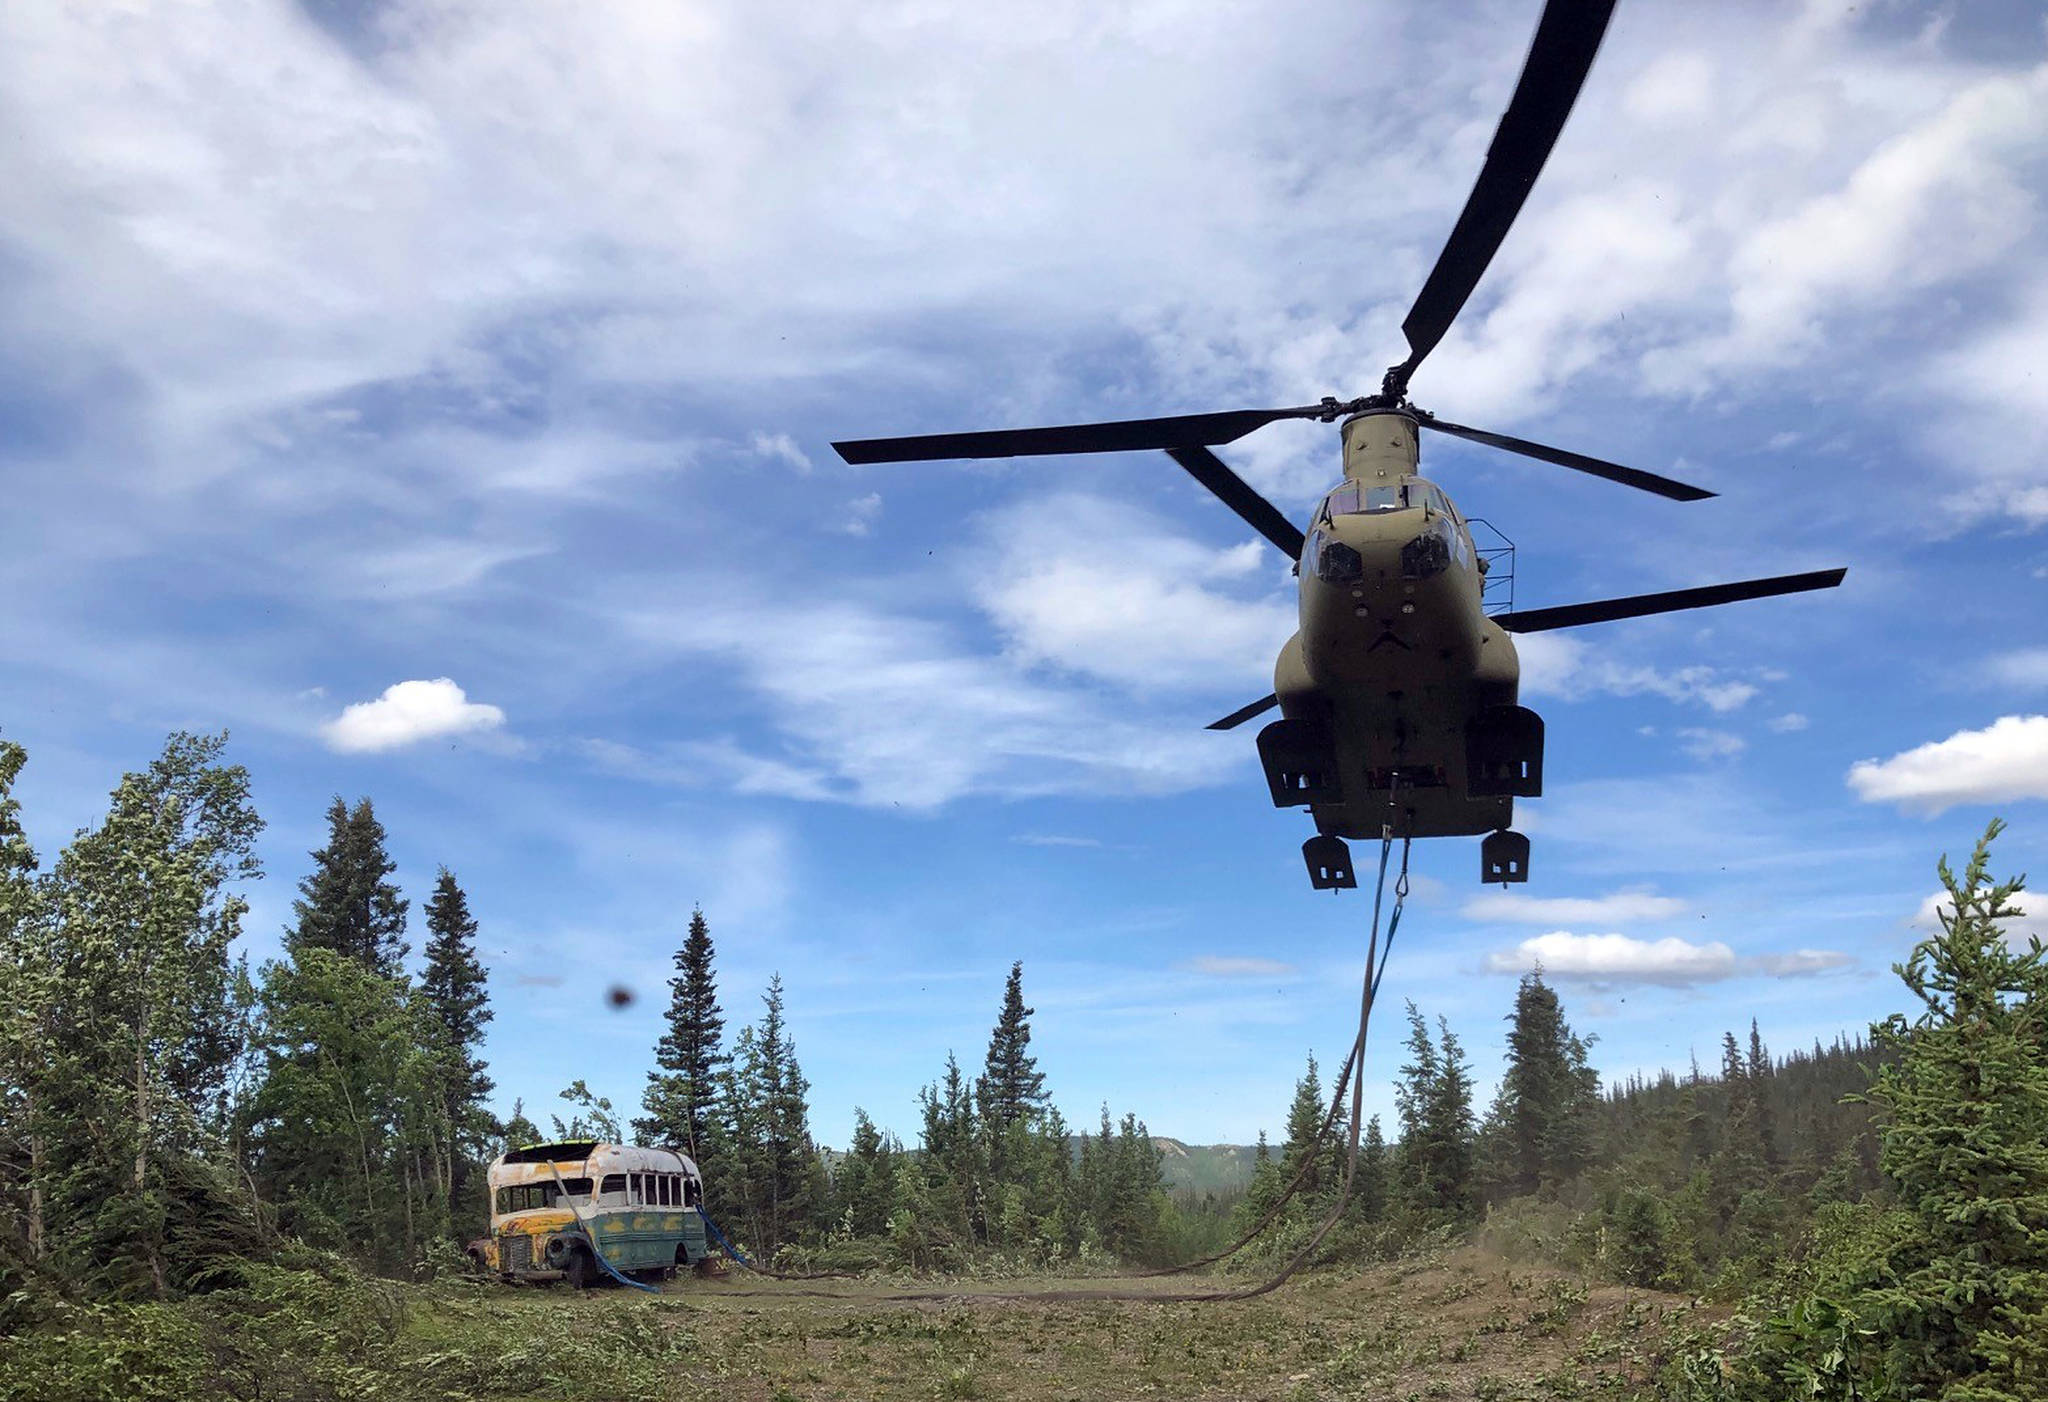 Alaska Army National Guard soldiers use a CH-47 Chinook helicopter to remove an abandoned bus, popularized by the book and movie “Into the Wild,” out of its location in the Alaska backcountry. The state Department of Natural Resources said Thursday, July 30, that it intends to negotiate with the University of Alaska’s Museum of the North in Fairbanks to display the bus. (Sgt. Seth LaCount/Alaska National Guard via AP, File)